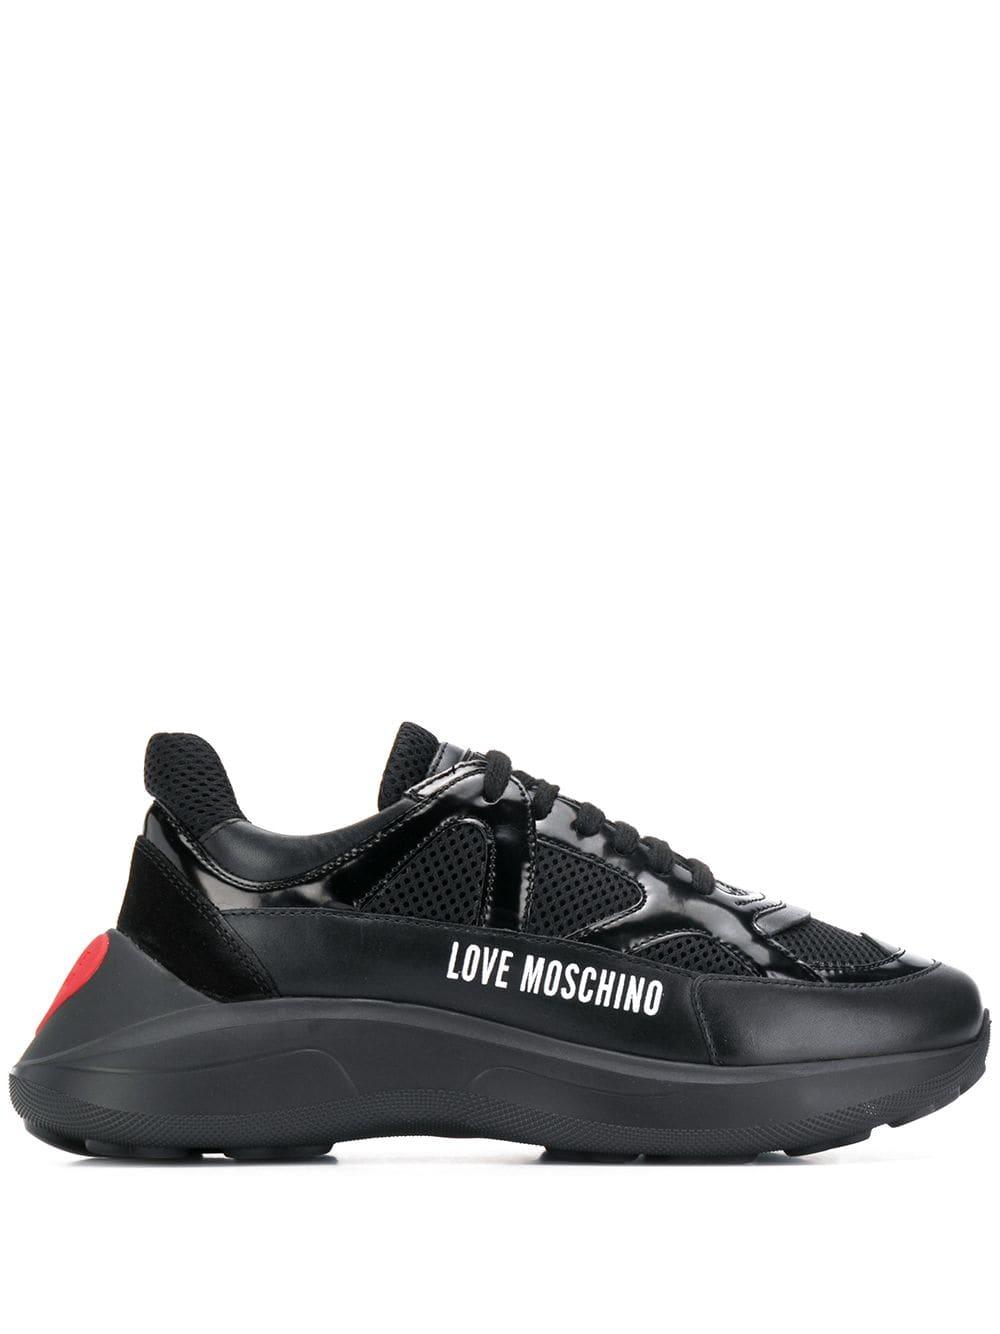 Love Moschino Heart Running Sneakers in Black | Lyst